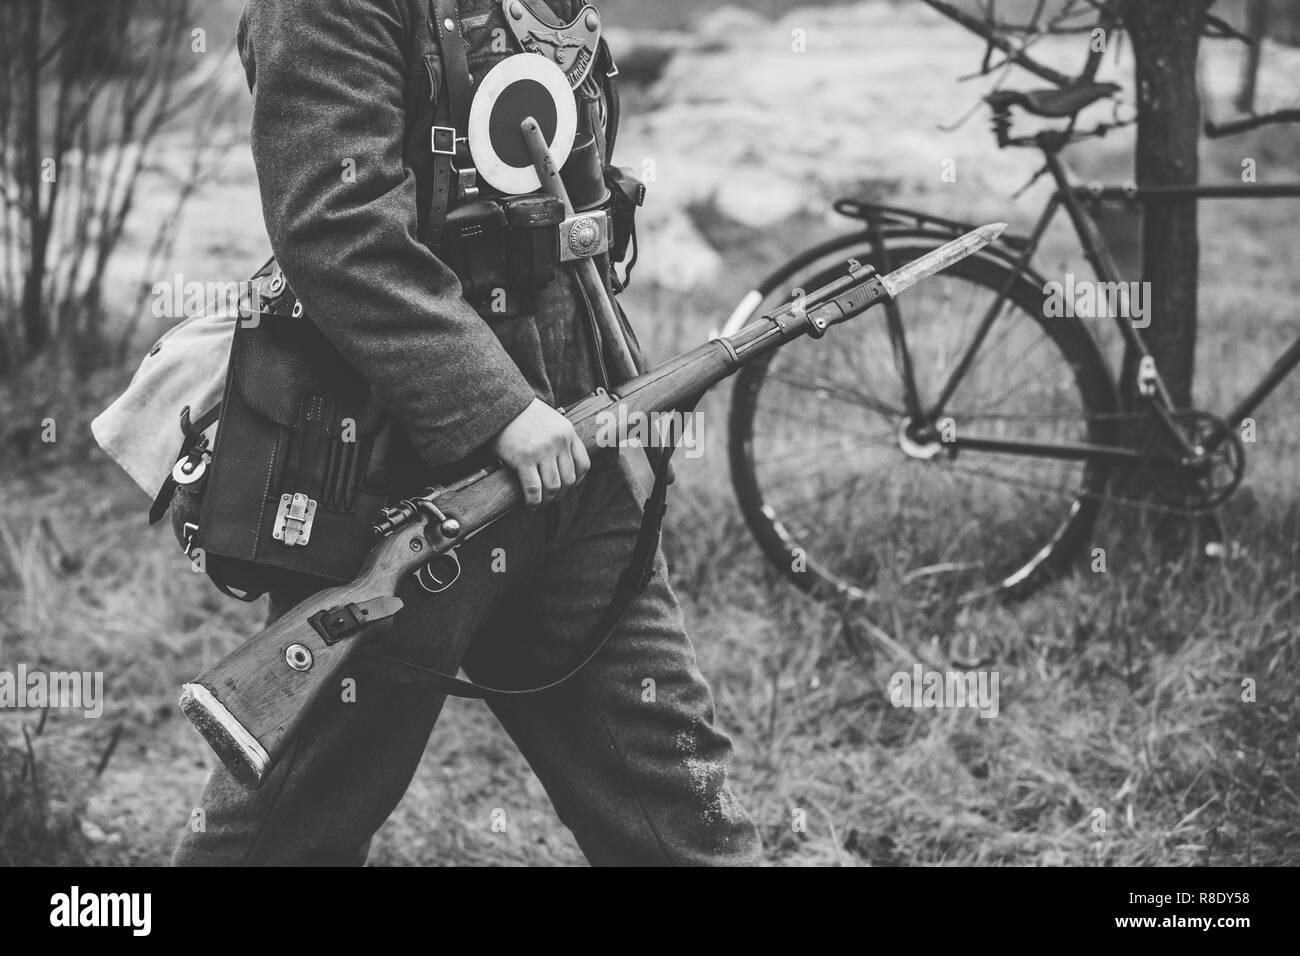 Re-enactor Dressed As World War II German Soldier Feldgendarm Holding Rifle. Photo In Black And White Colors. Soldier Holding Weapon. German Military  Stock Photo